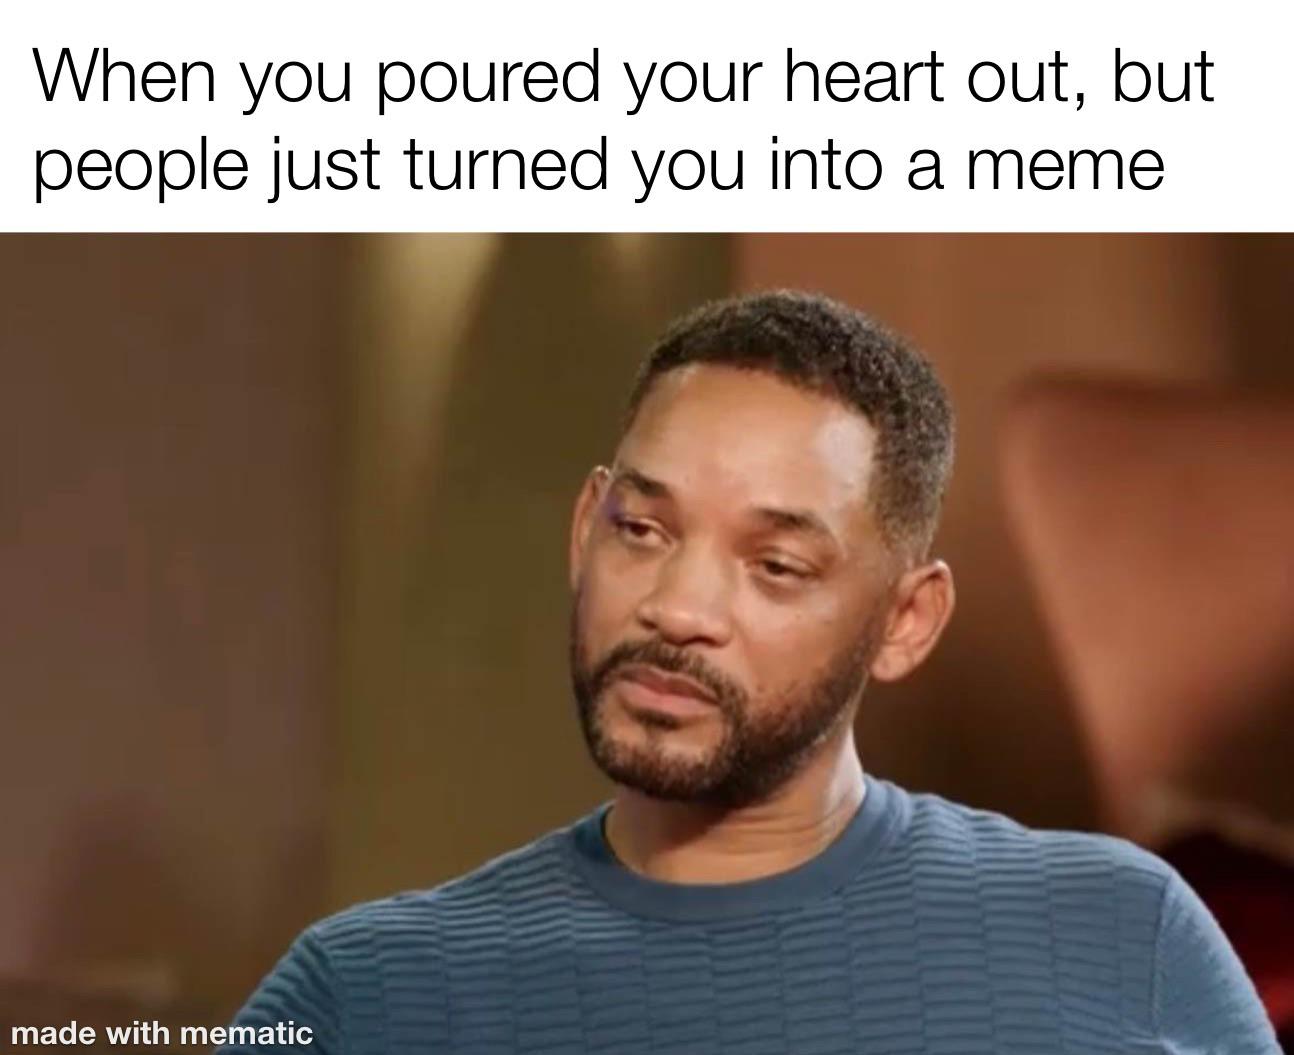 did will smith wife cheat on him - When you poured your heart out, but people just turned you into a meme made with mematic